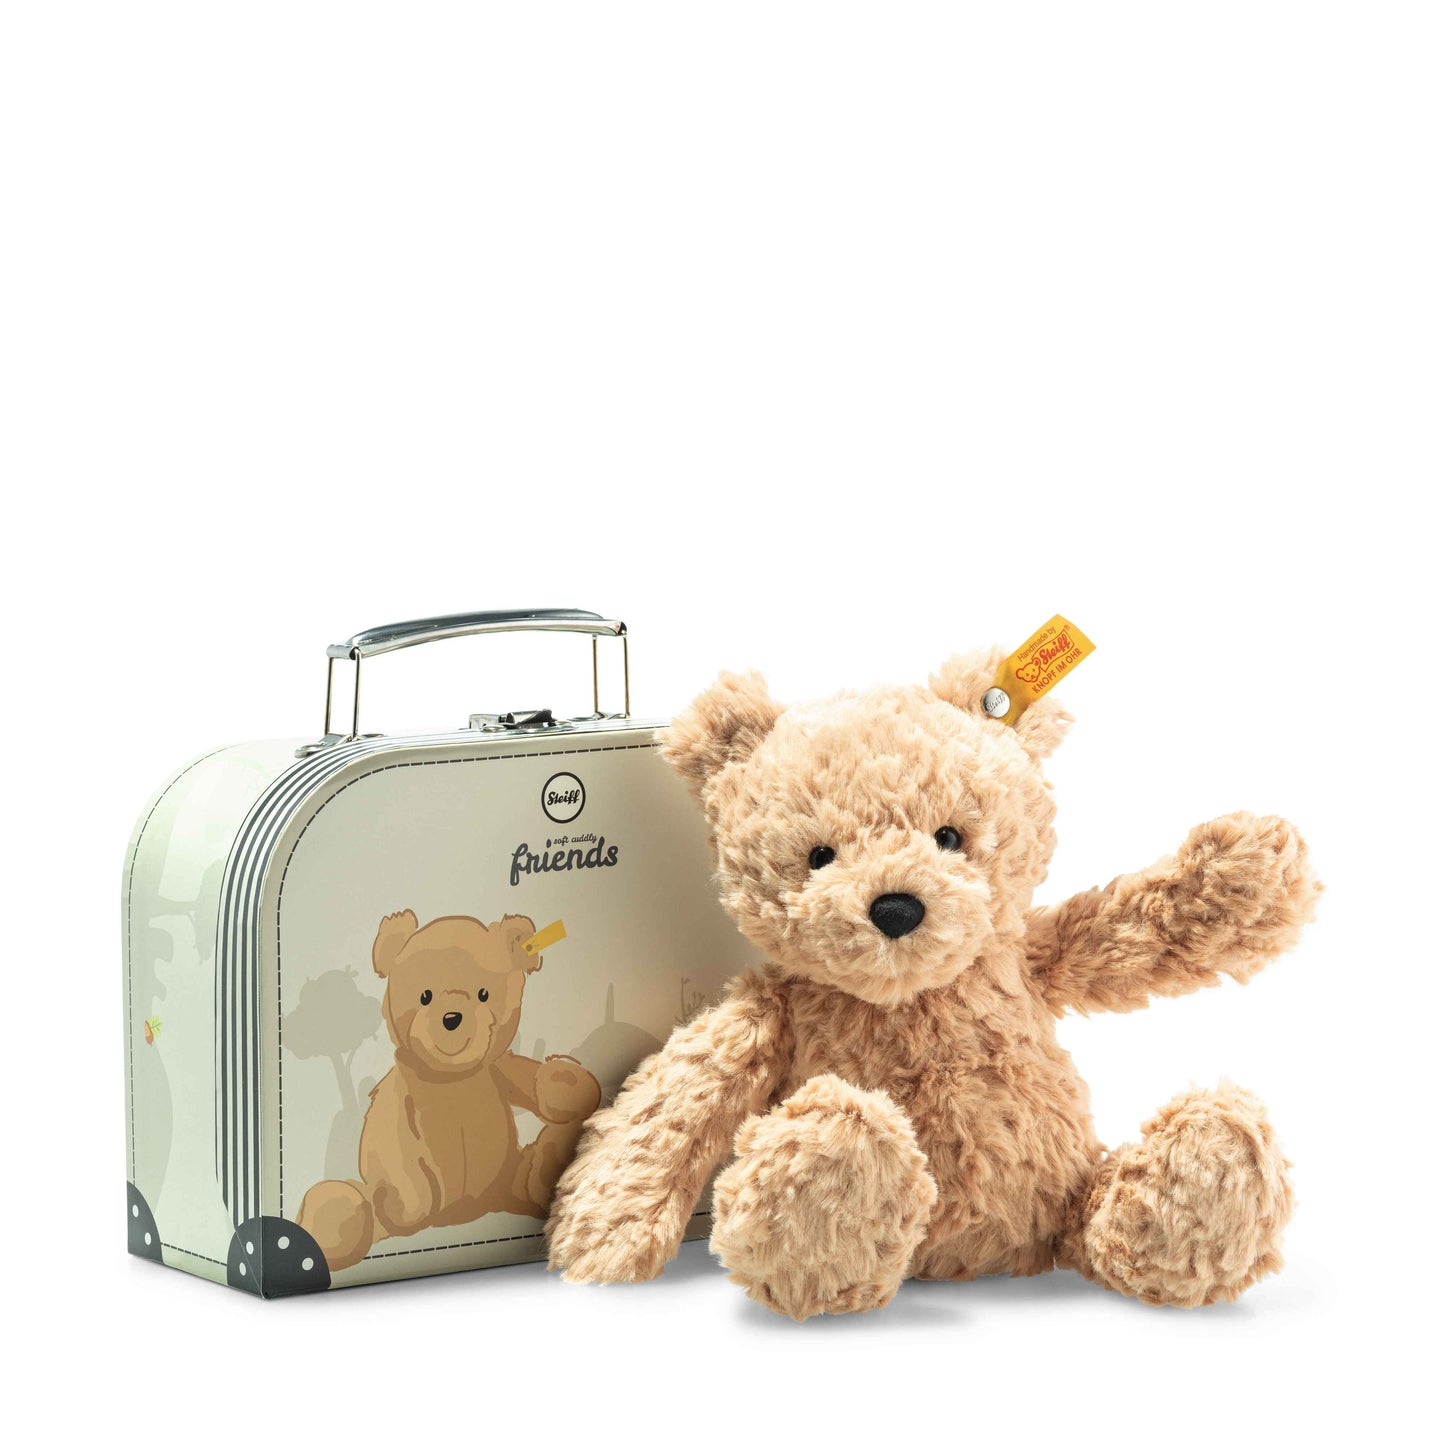 Jimmy Teddy Bear In Suitcase, 10 Inches